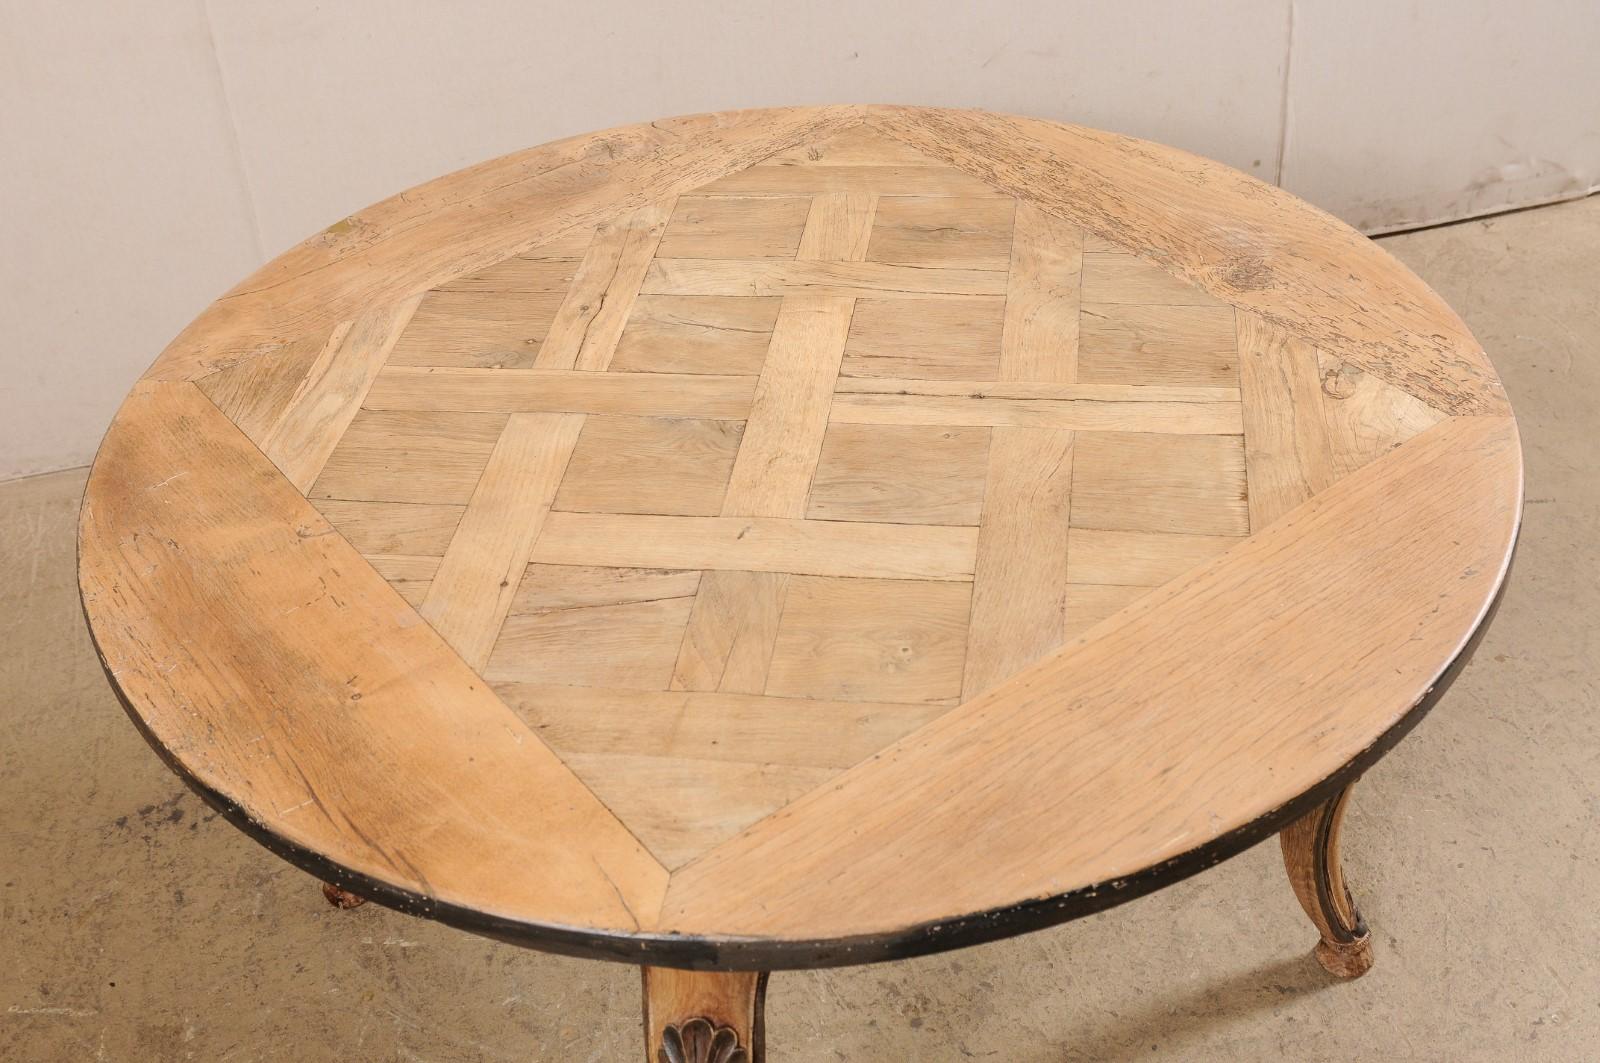 19th Century French Round Table W/Lovely Lattice Inlay Top & Scalloped Skirt, 19th C